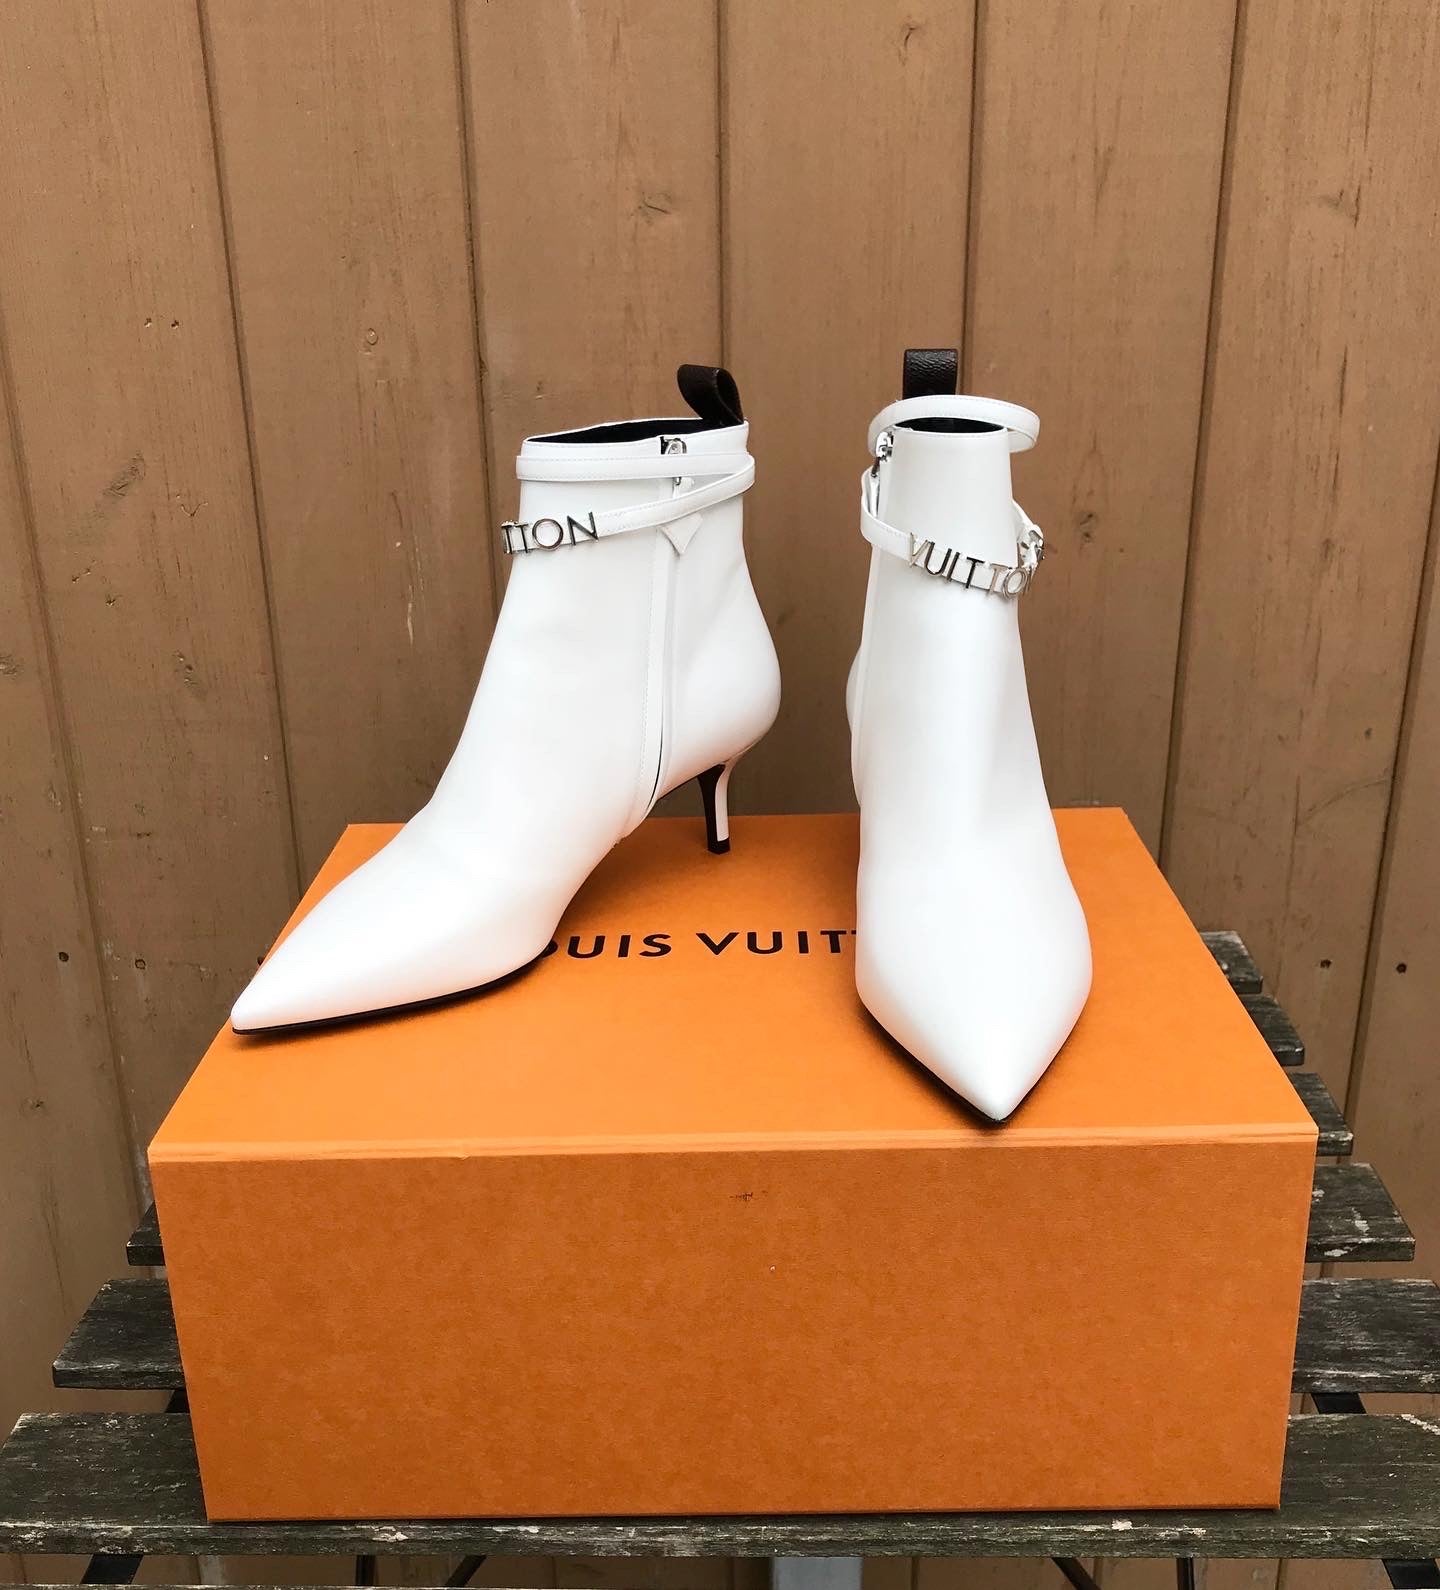 Women's Call Back Ankle Boot, LOUIS VUITTON